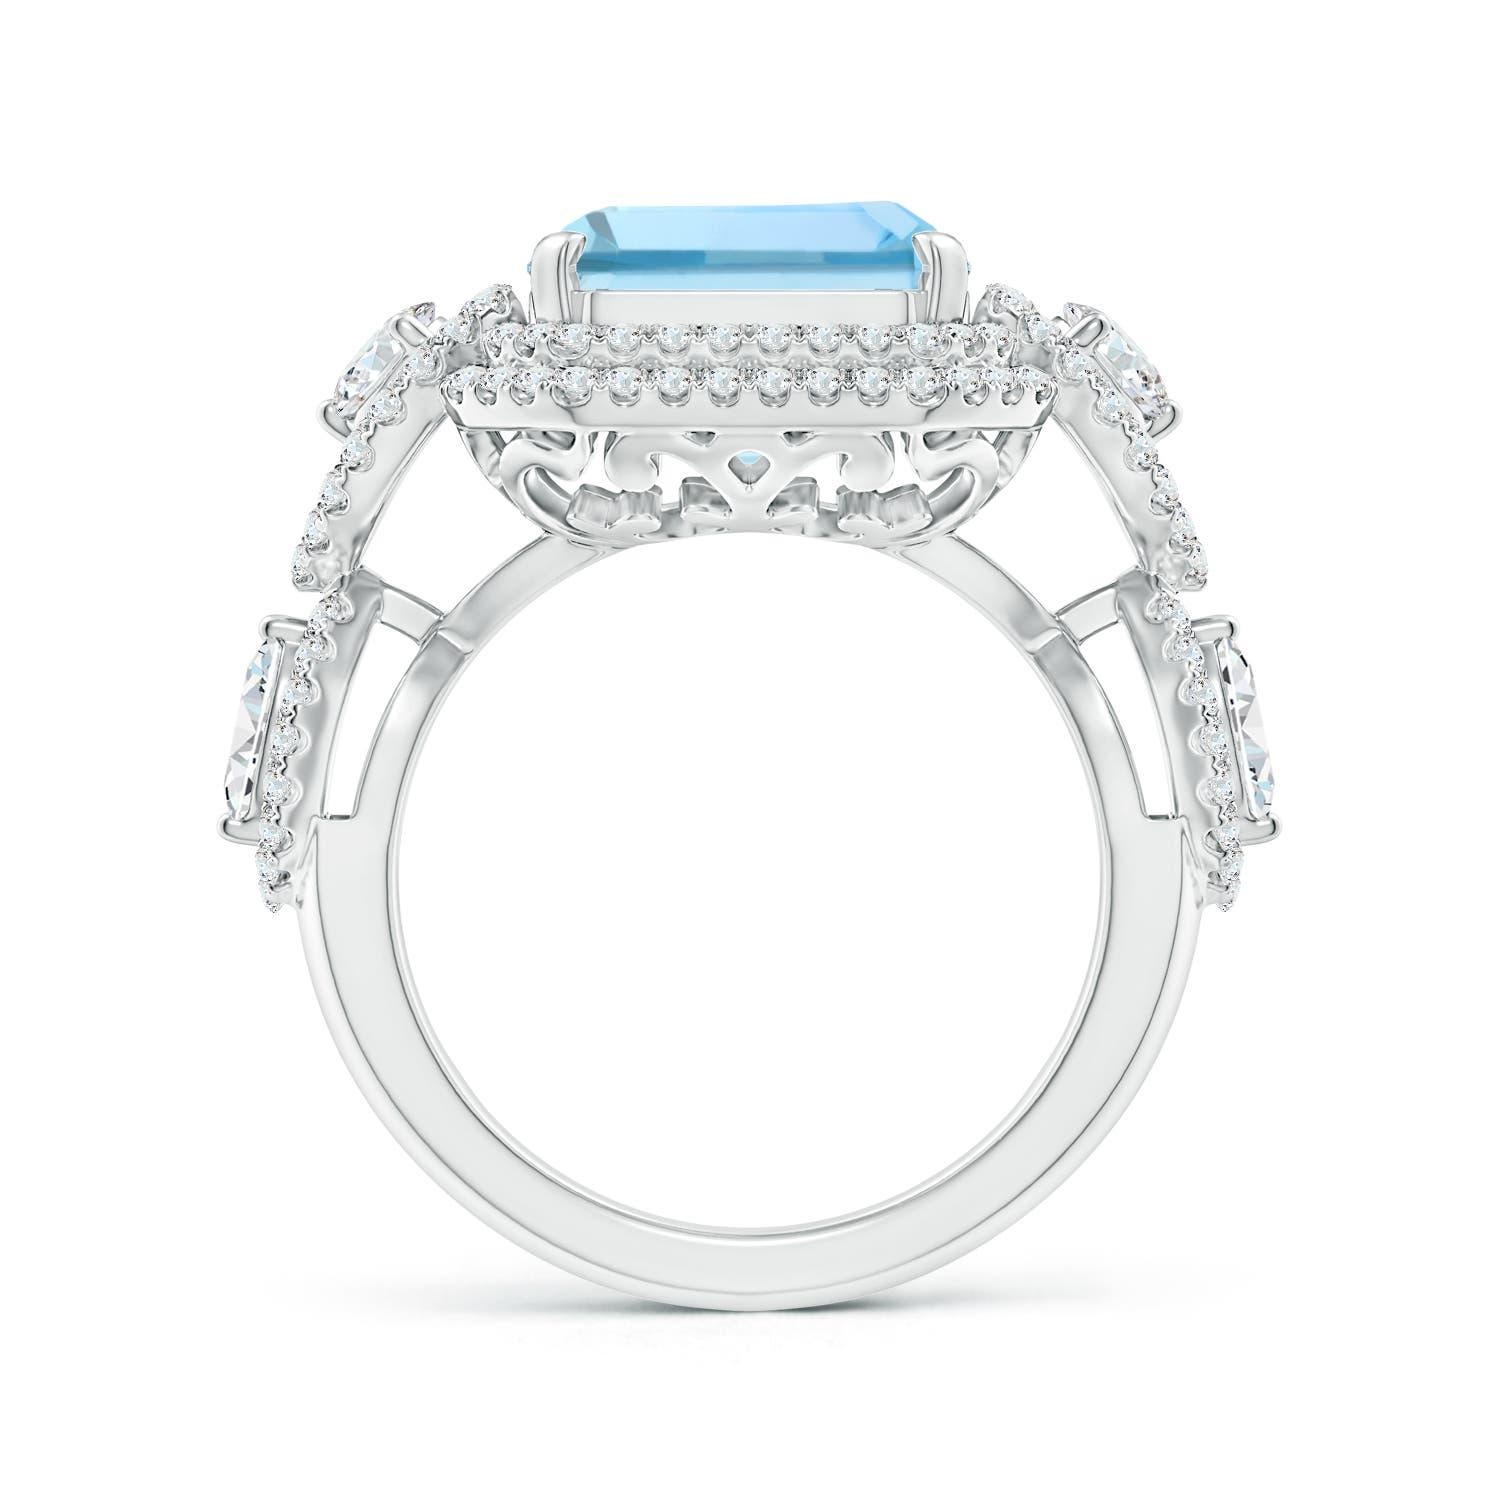 For Sale:  Angara Gia Certified Aquamarine Ring in White Gold with Marquise Diamonds 2